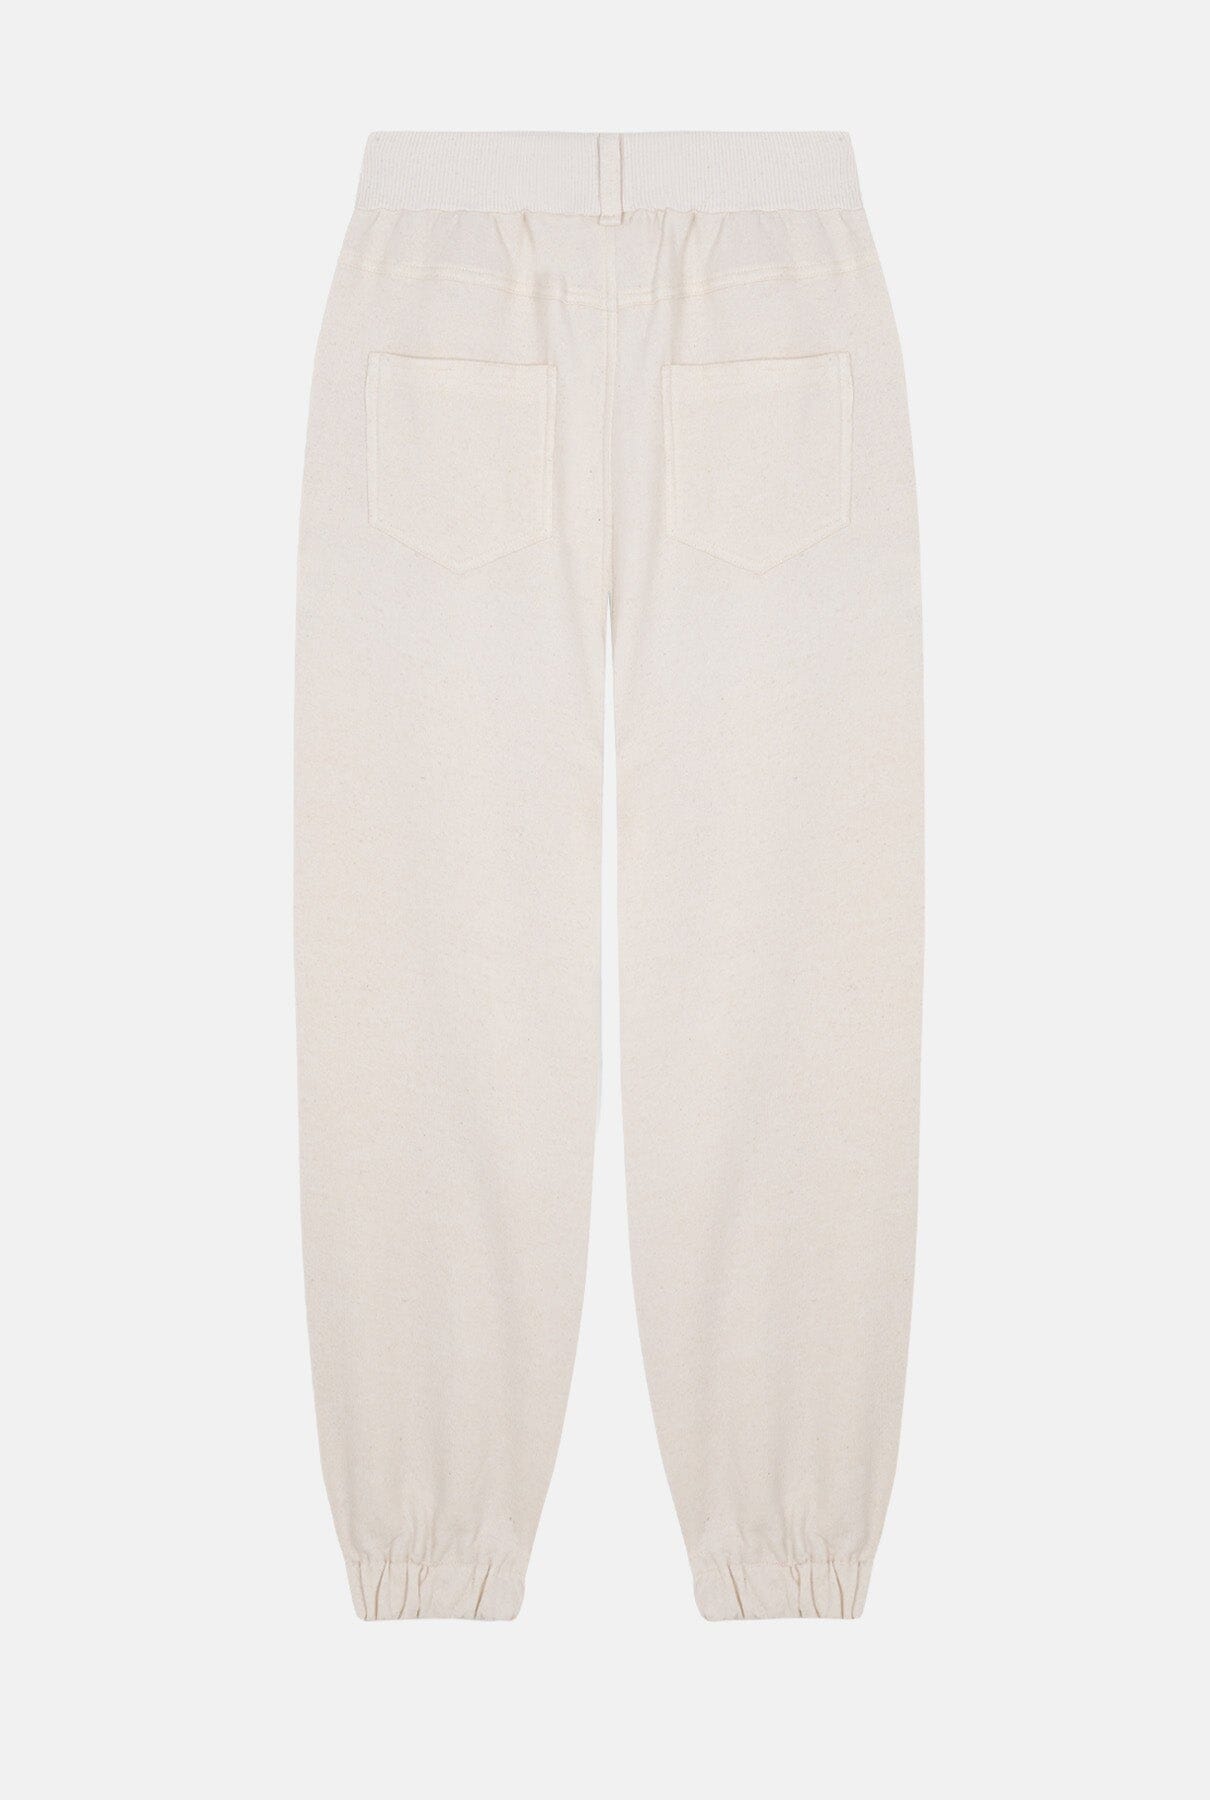 Xenia Jogger Off-White Trousers The Label Edition 